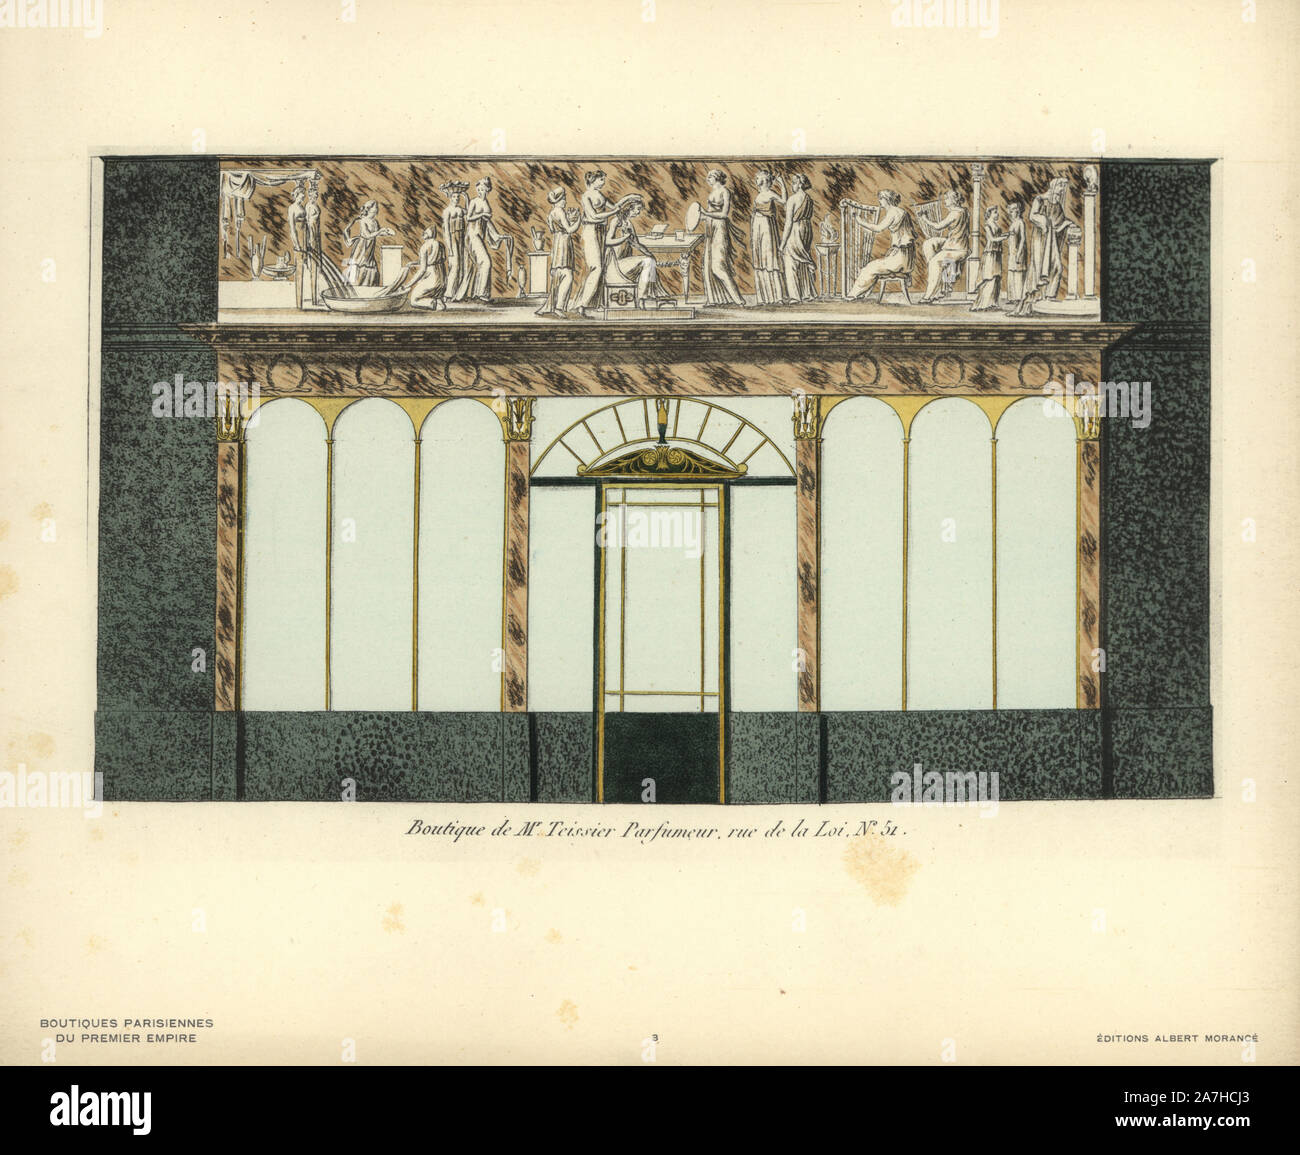 Shopfront to Teissier's Perfumery, 51 rue de la Loi, Paris, circa 1800. Handcoloured lithograph from Hector-Martin Lefuel's 'Boutiques Parisiennes du Premier Empire,' (Parisian Stores of the First Empire), Paris, Albert Morance, 1925. The lithographs were reproduced from watercolors by the French architect Hector-Martin Lefuel (1810-1880), famous for his work on the completion of the Louvre and Fontainebleau. Stock Photo